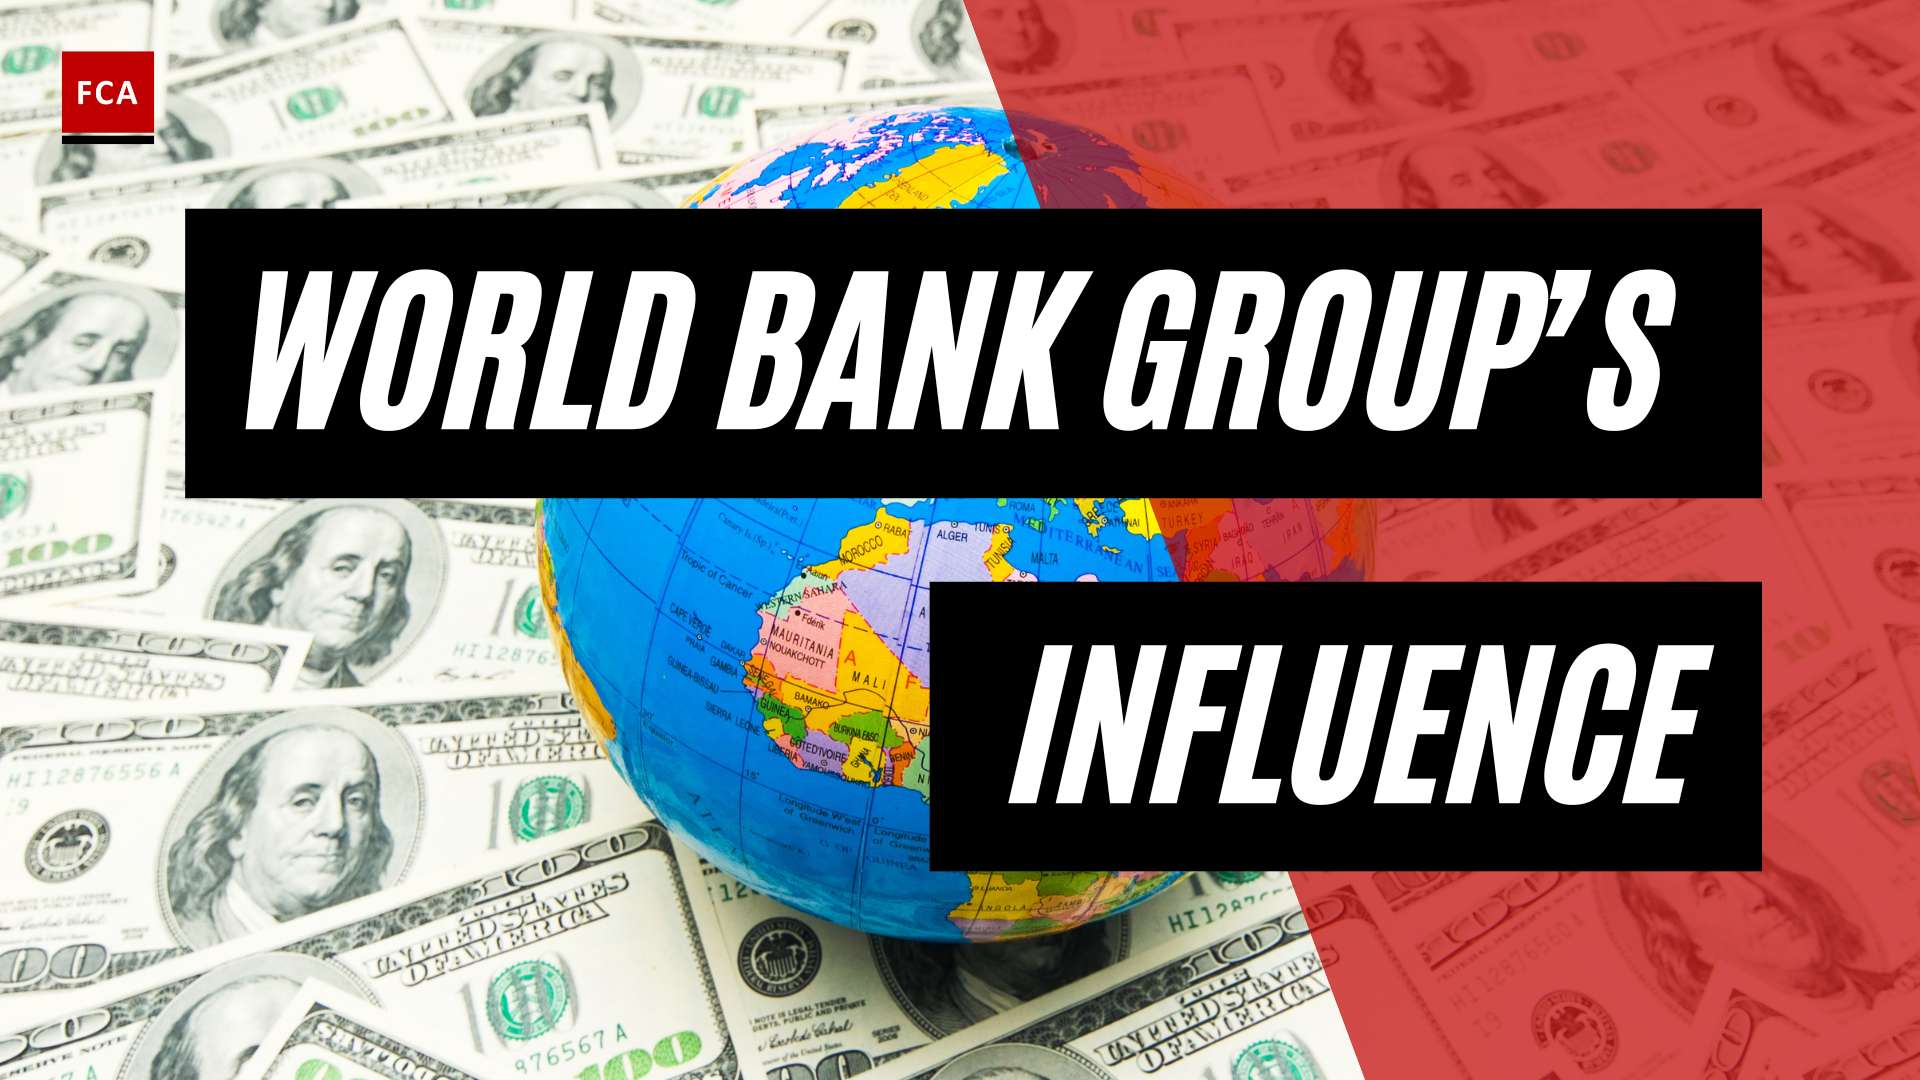 Global Aml Defenders: World Bank Groups Impact And Influence